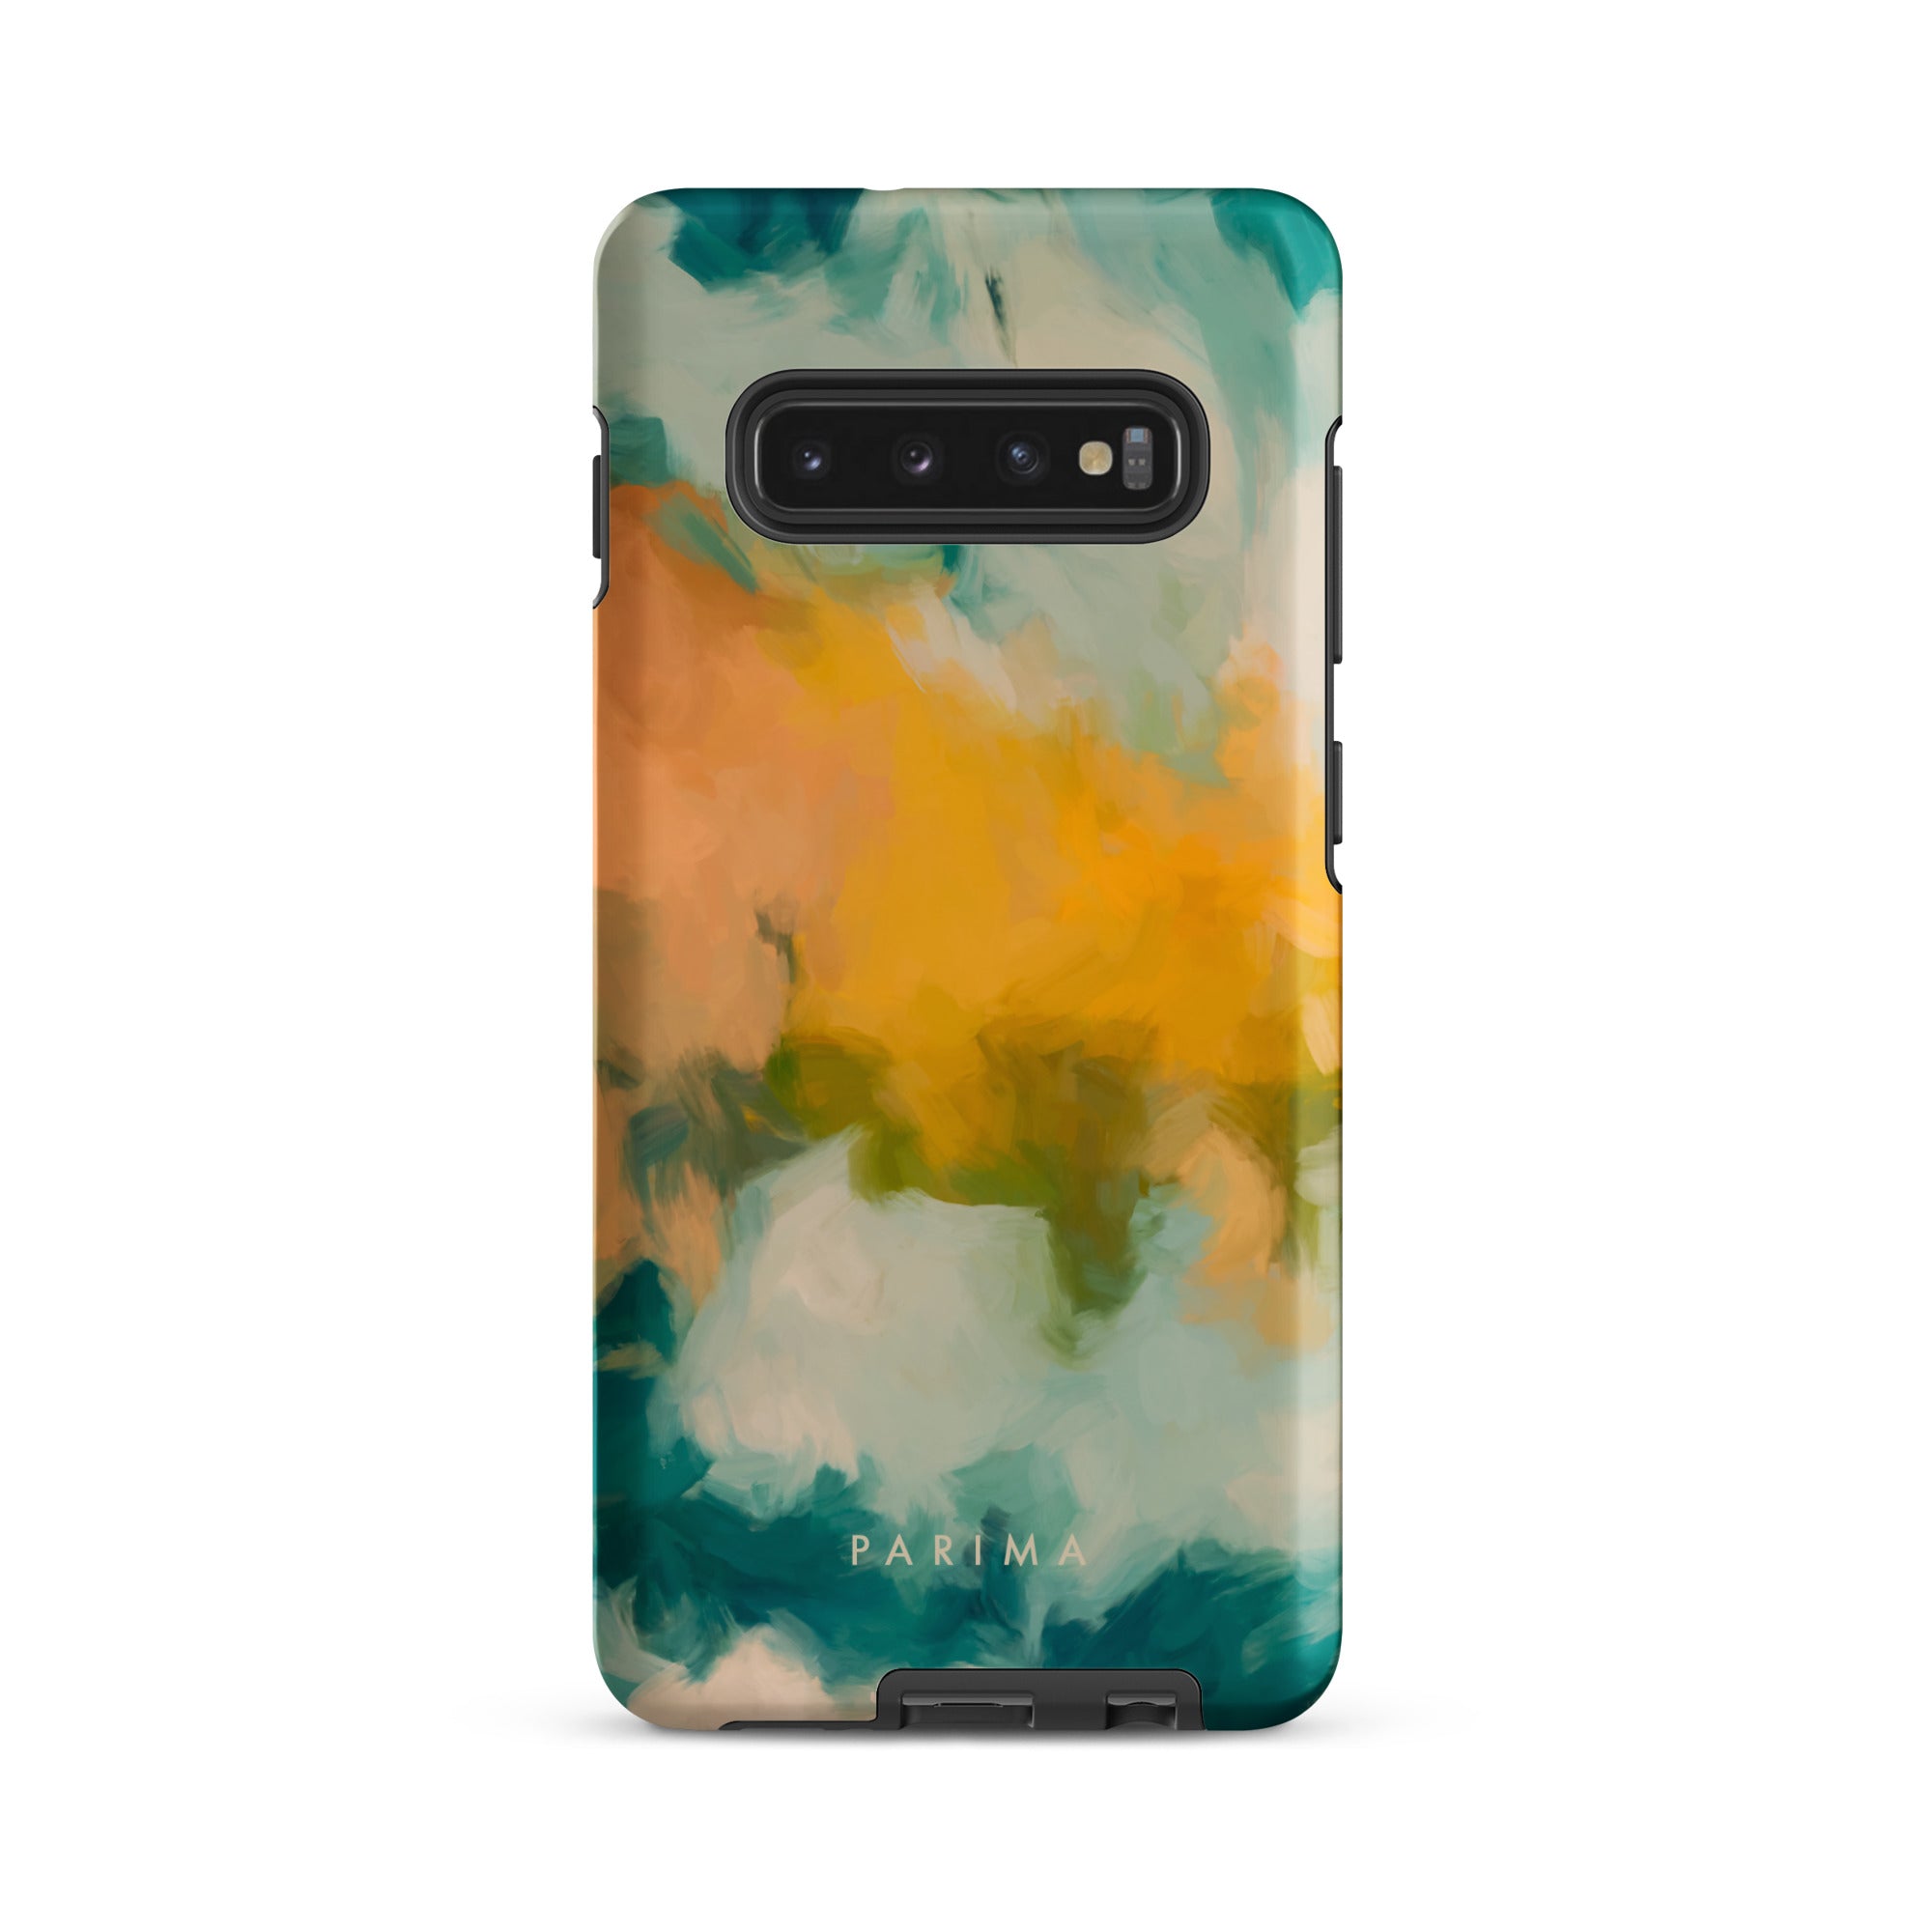 Beach Day, blue and yellow abstract art on Samsung Galaxy S10 Plus tough case by Parima Studio